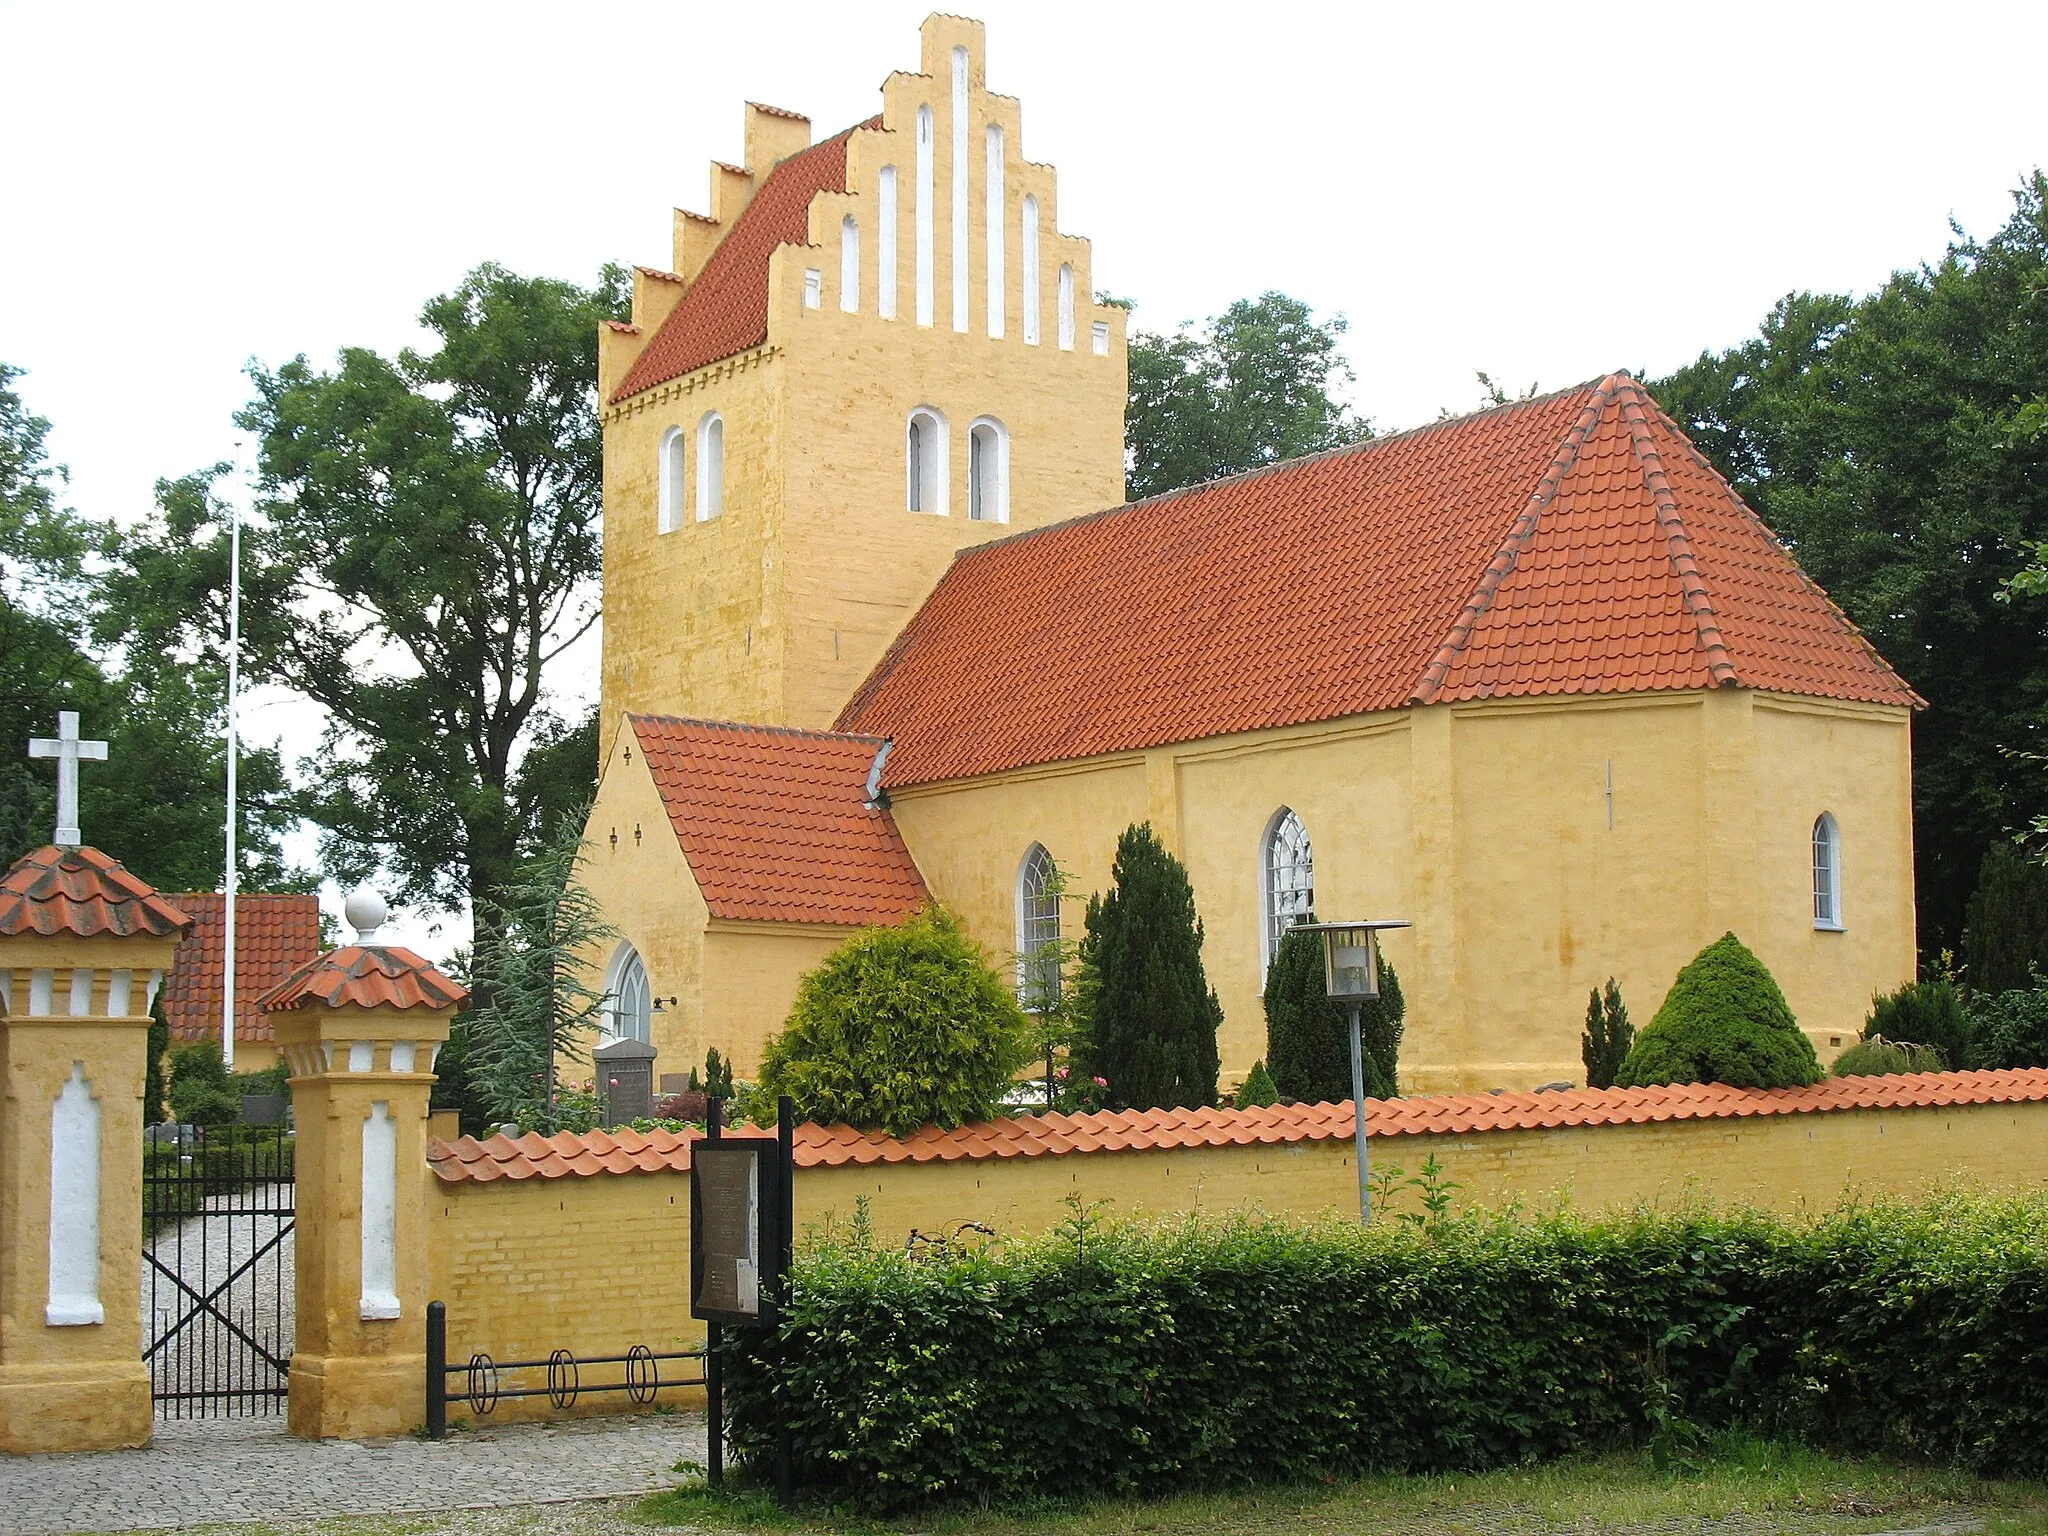 Photo showing: The church "Solrød Kirke" in the village "Solrød" located between the towns "Køge" and "Roskilde" in Middle Zealand, east Denmark.